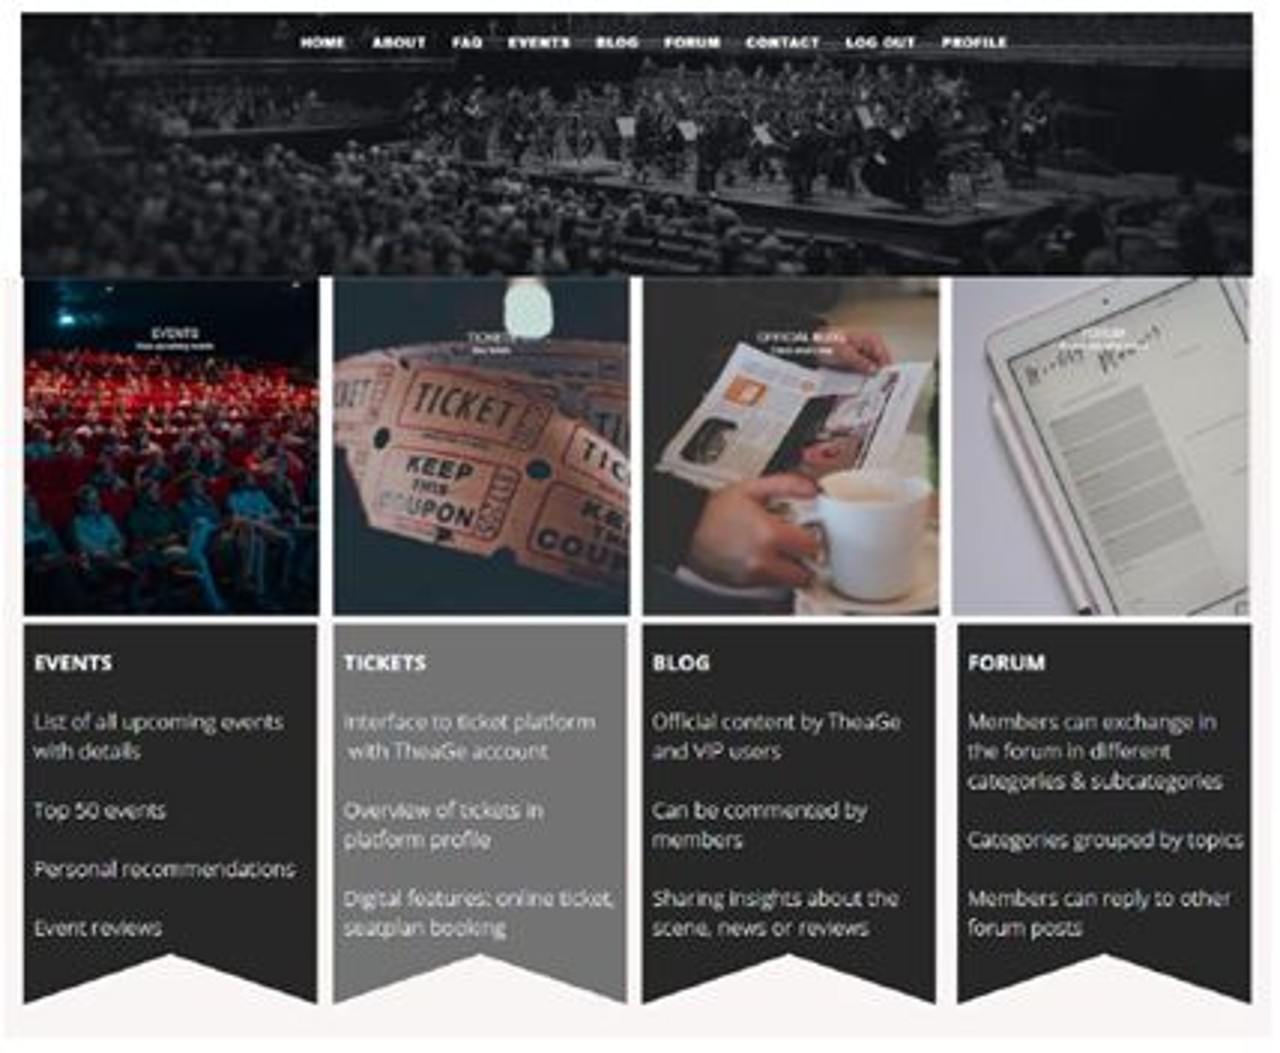 The picture shows the prototype of a website or member platform designed by a team of students for the Theater Gesellschaft München ( Theatre Society Munich). At the top of the website you can see the names of various sub-pages, e.g. FAQ, Events, Blog, Forum,... Below is a picture of a large orchestra in an opera or theatre building. The orchestra is playing in front of a full audience. Below that, there are four columns showing what can be found on the various sub-pages. They are named 